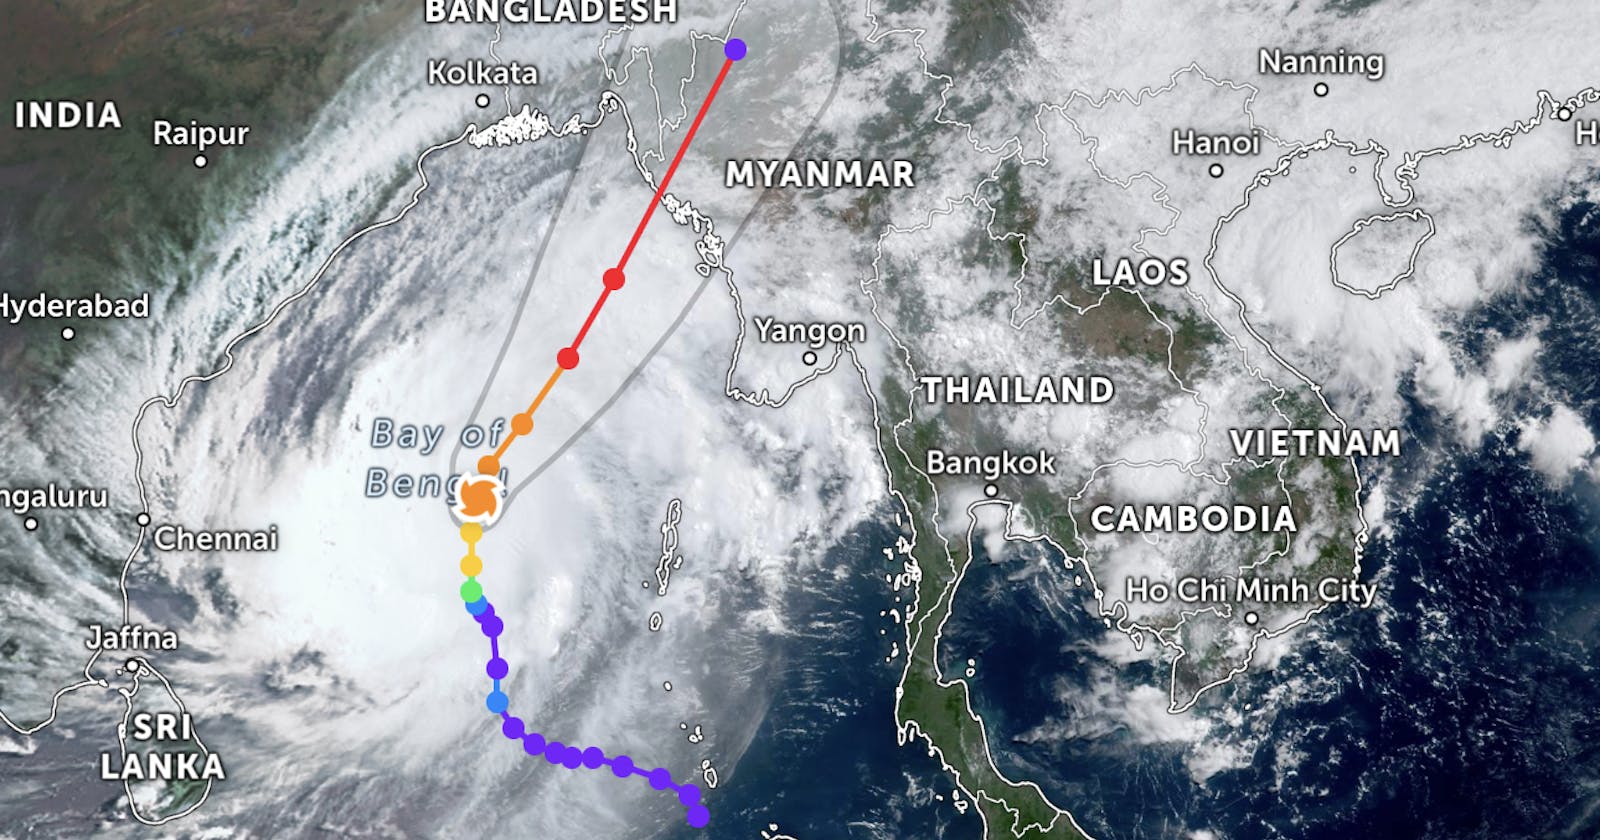 Resources to monitor Cyclone Mocha which will impact Myanmar & Bangladesh